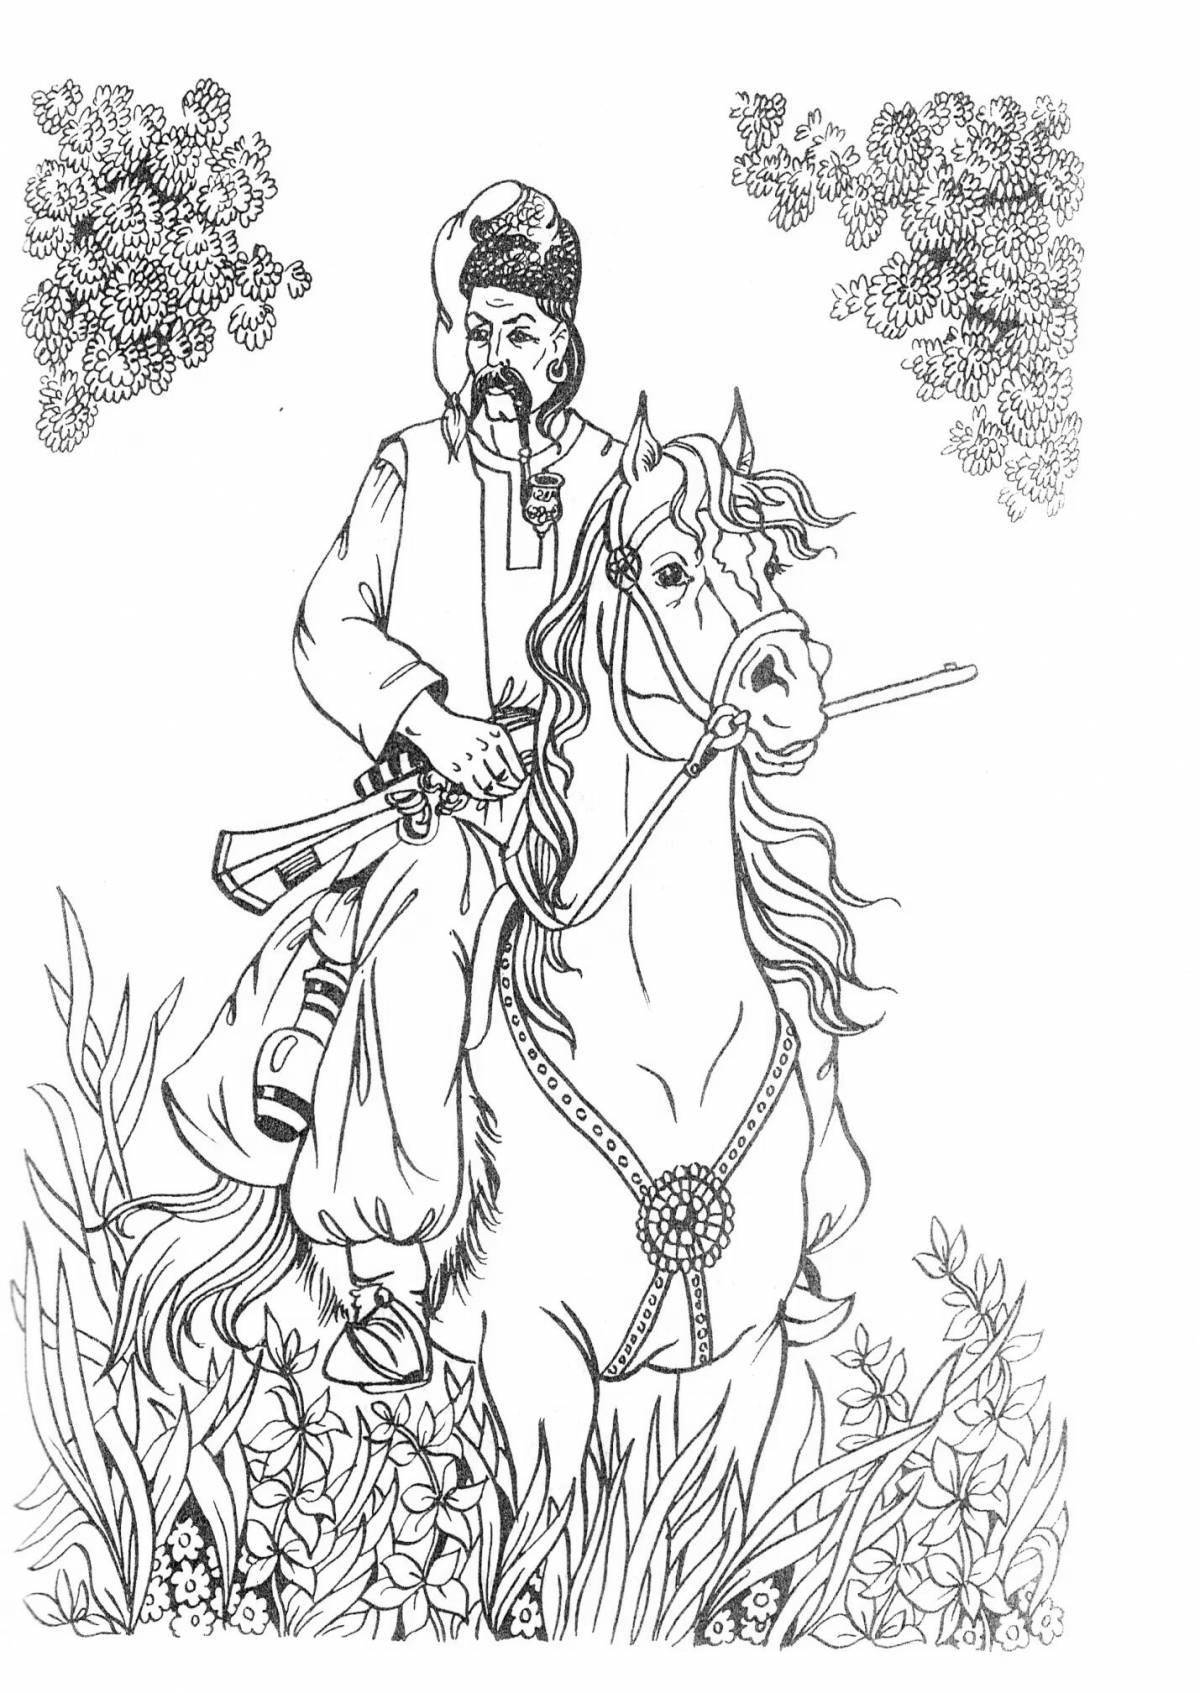 Coloring fairytale costume of a Cossack